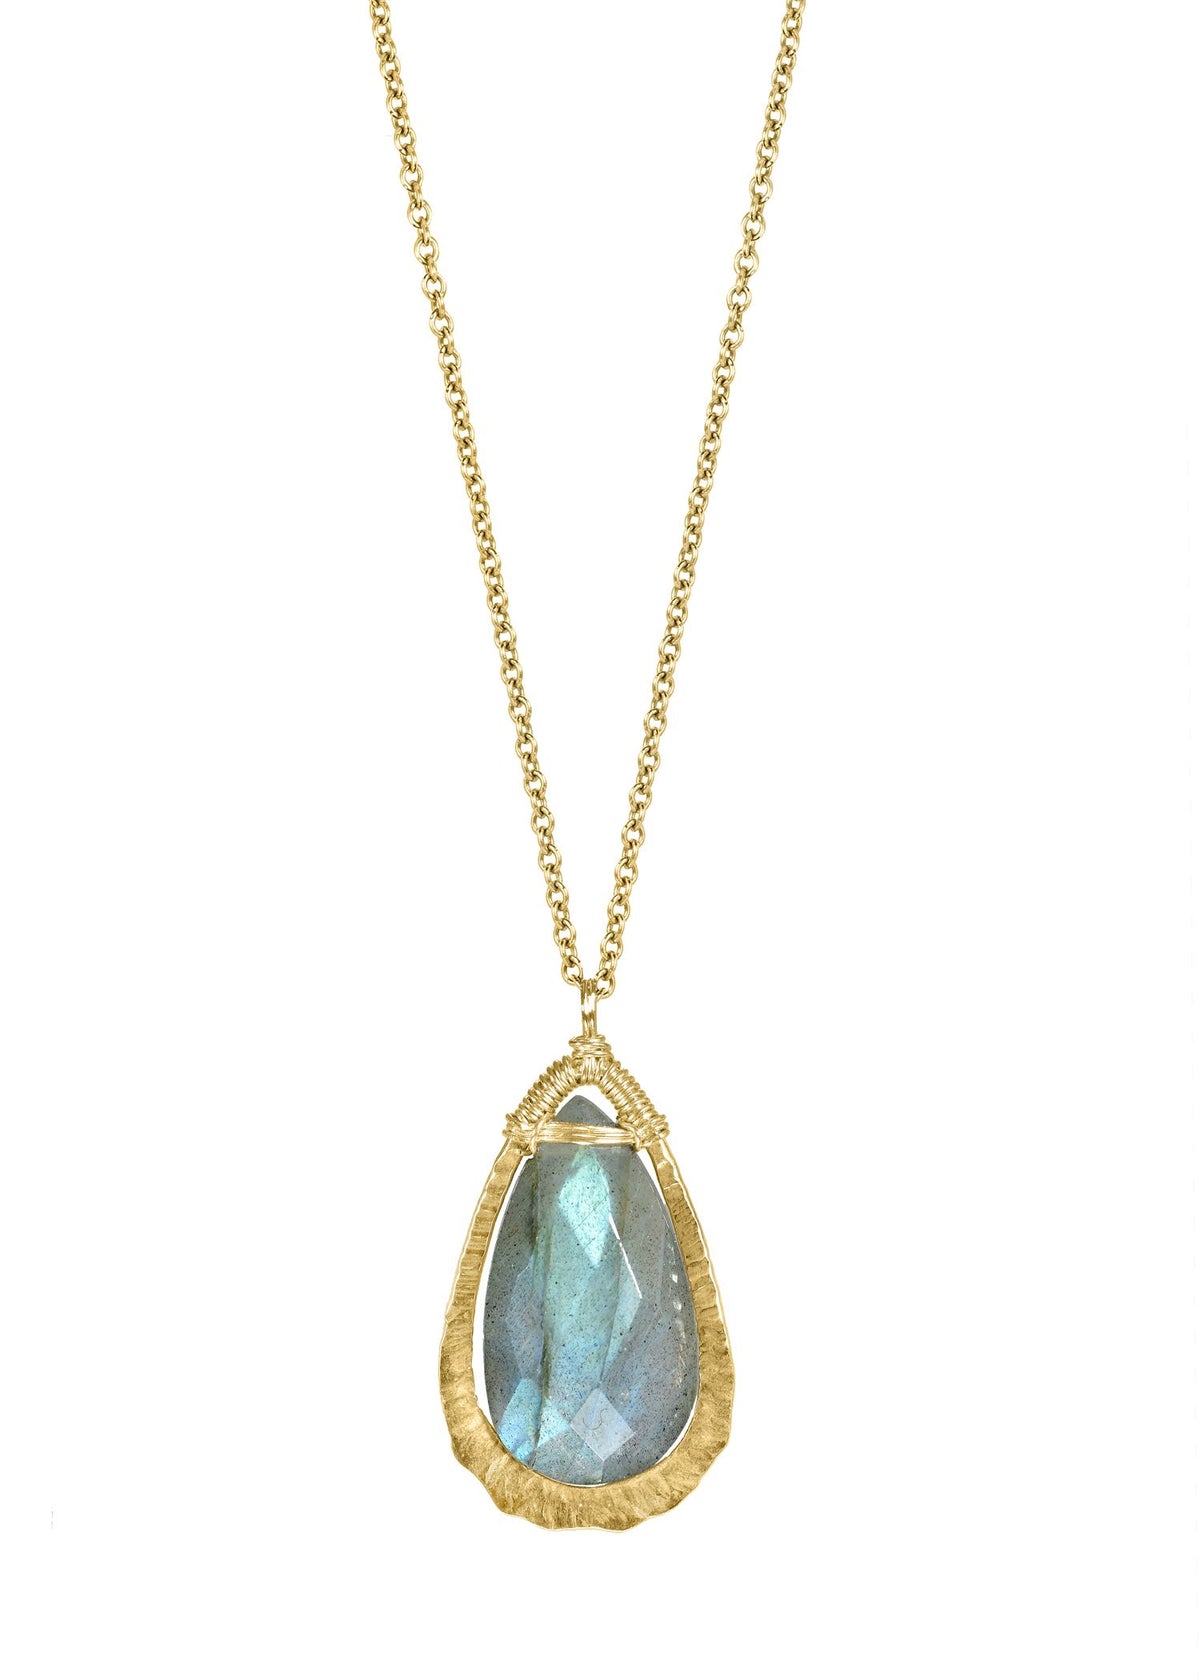 Labradorite 14k gold fill Necklace measures 18&quot; in length Pendant measures 7/8&quot; in length and 1/2&quot; in width Handmade in our Los Angeles studio